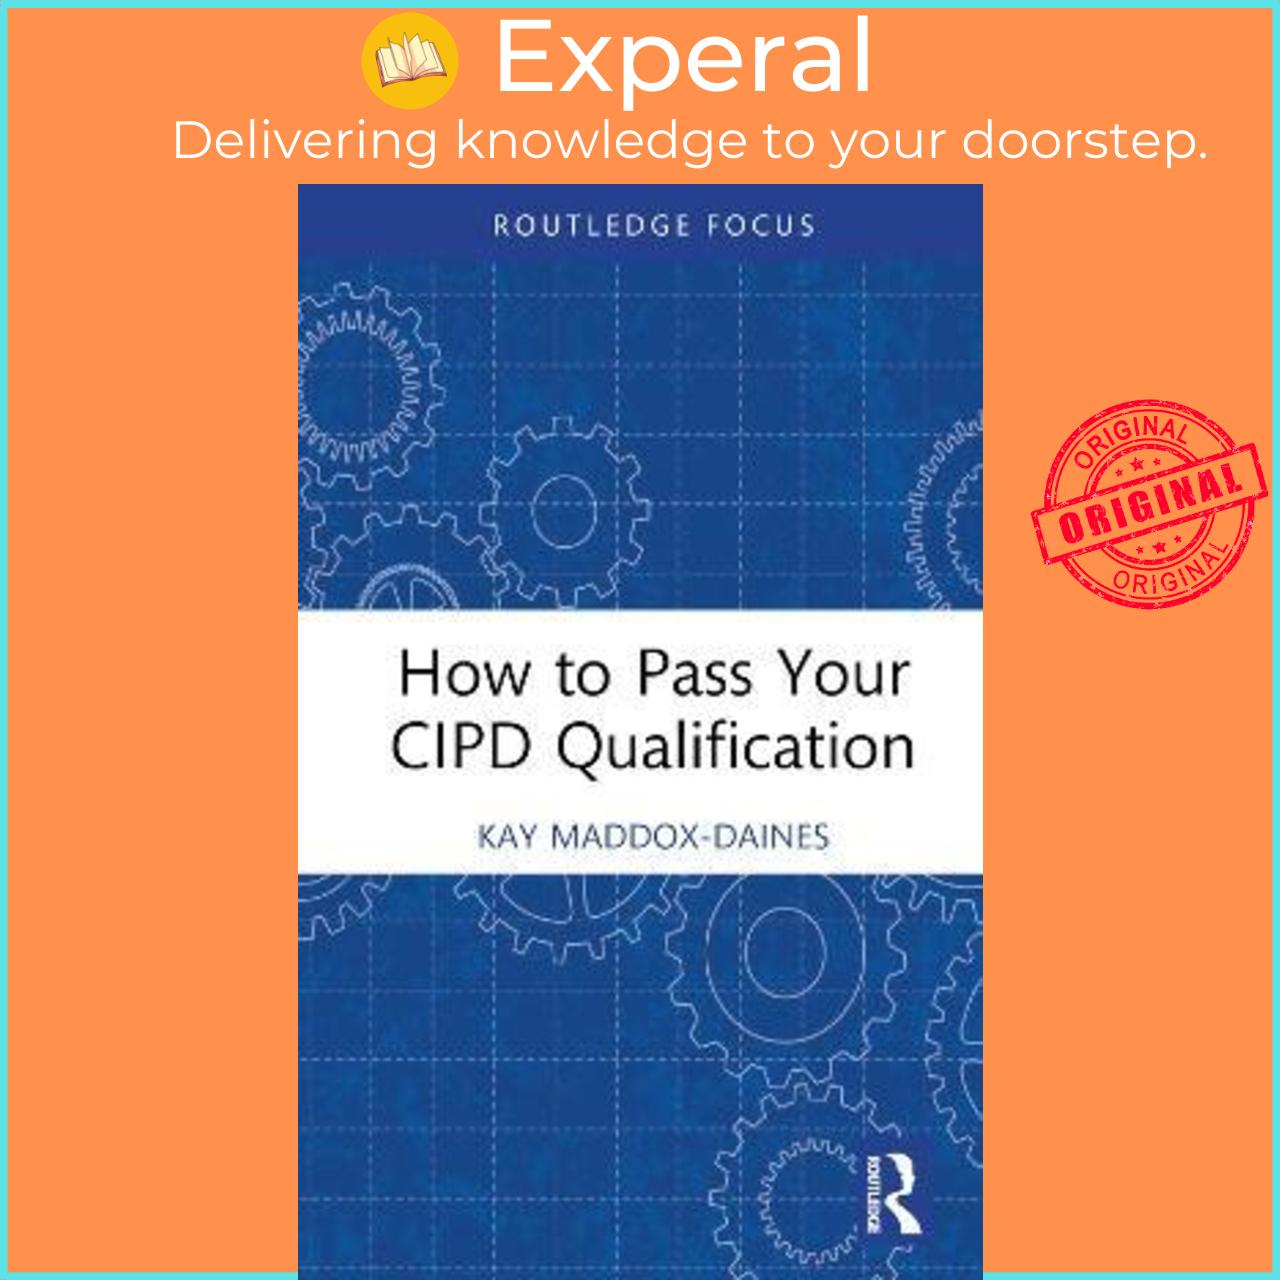 Sách - How to Pass Your CIPD Qualifications by Kay Maddox-Daines (UK edition, hardcover)